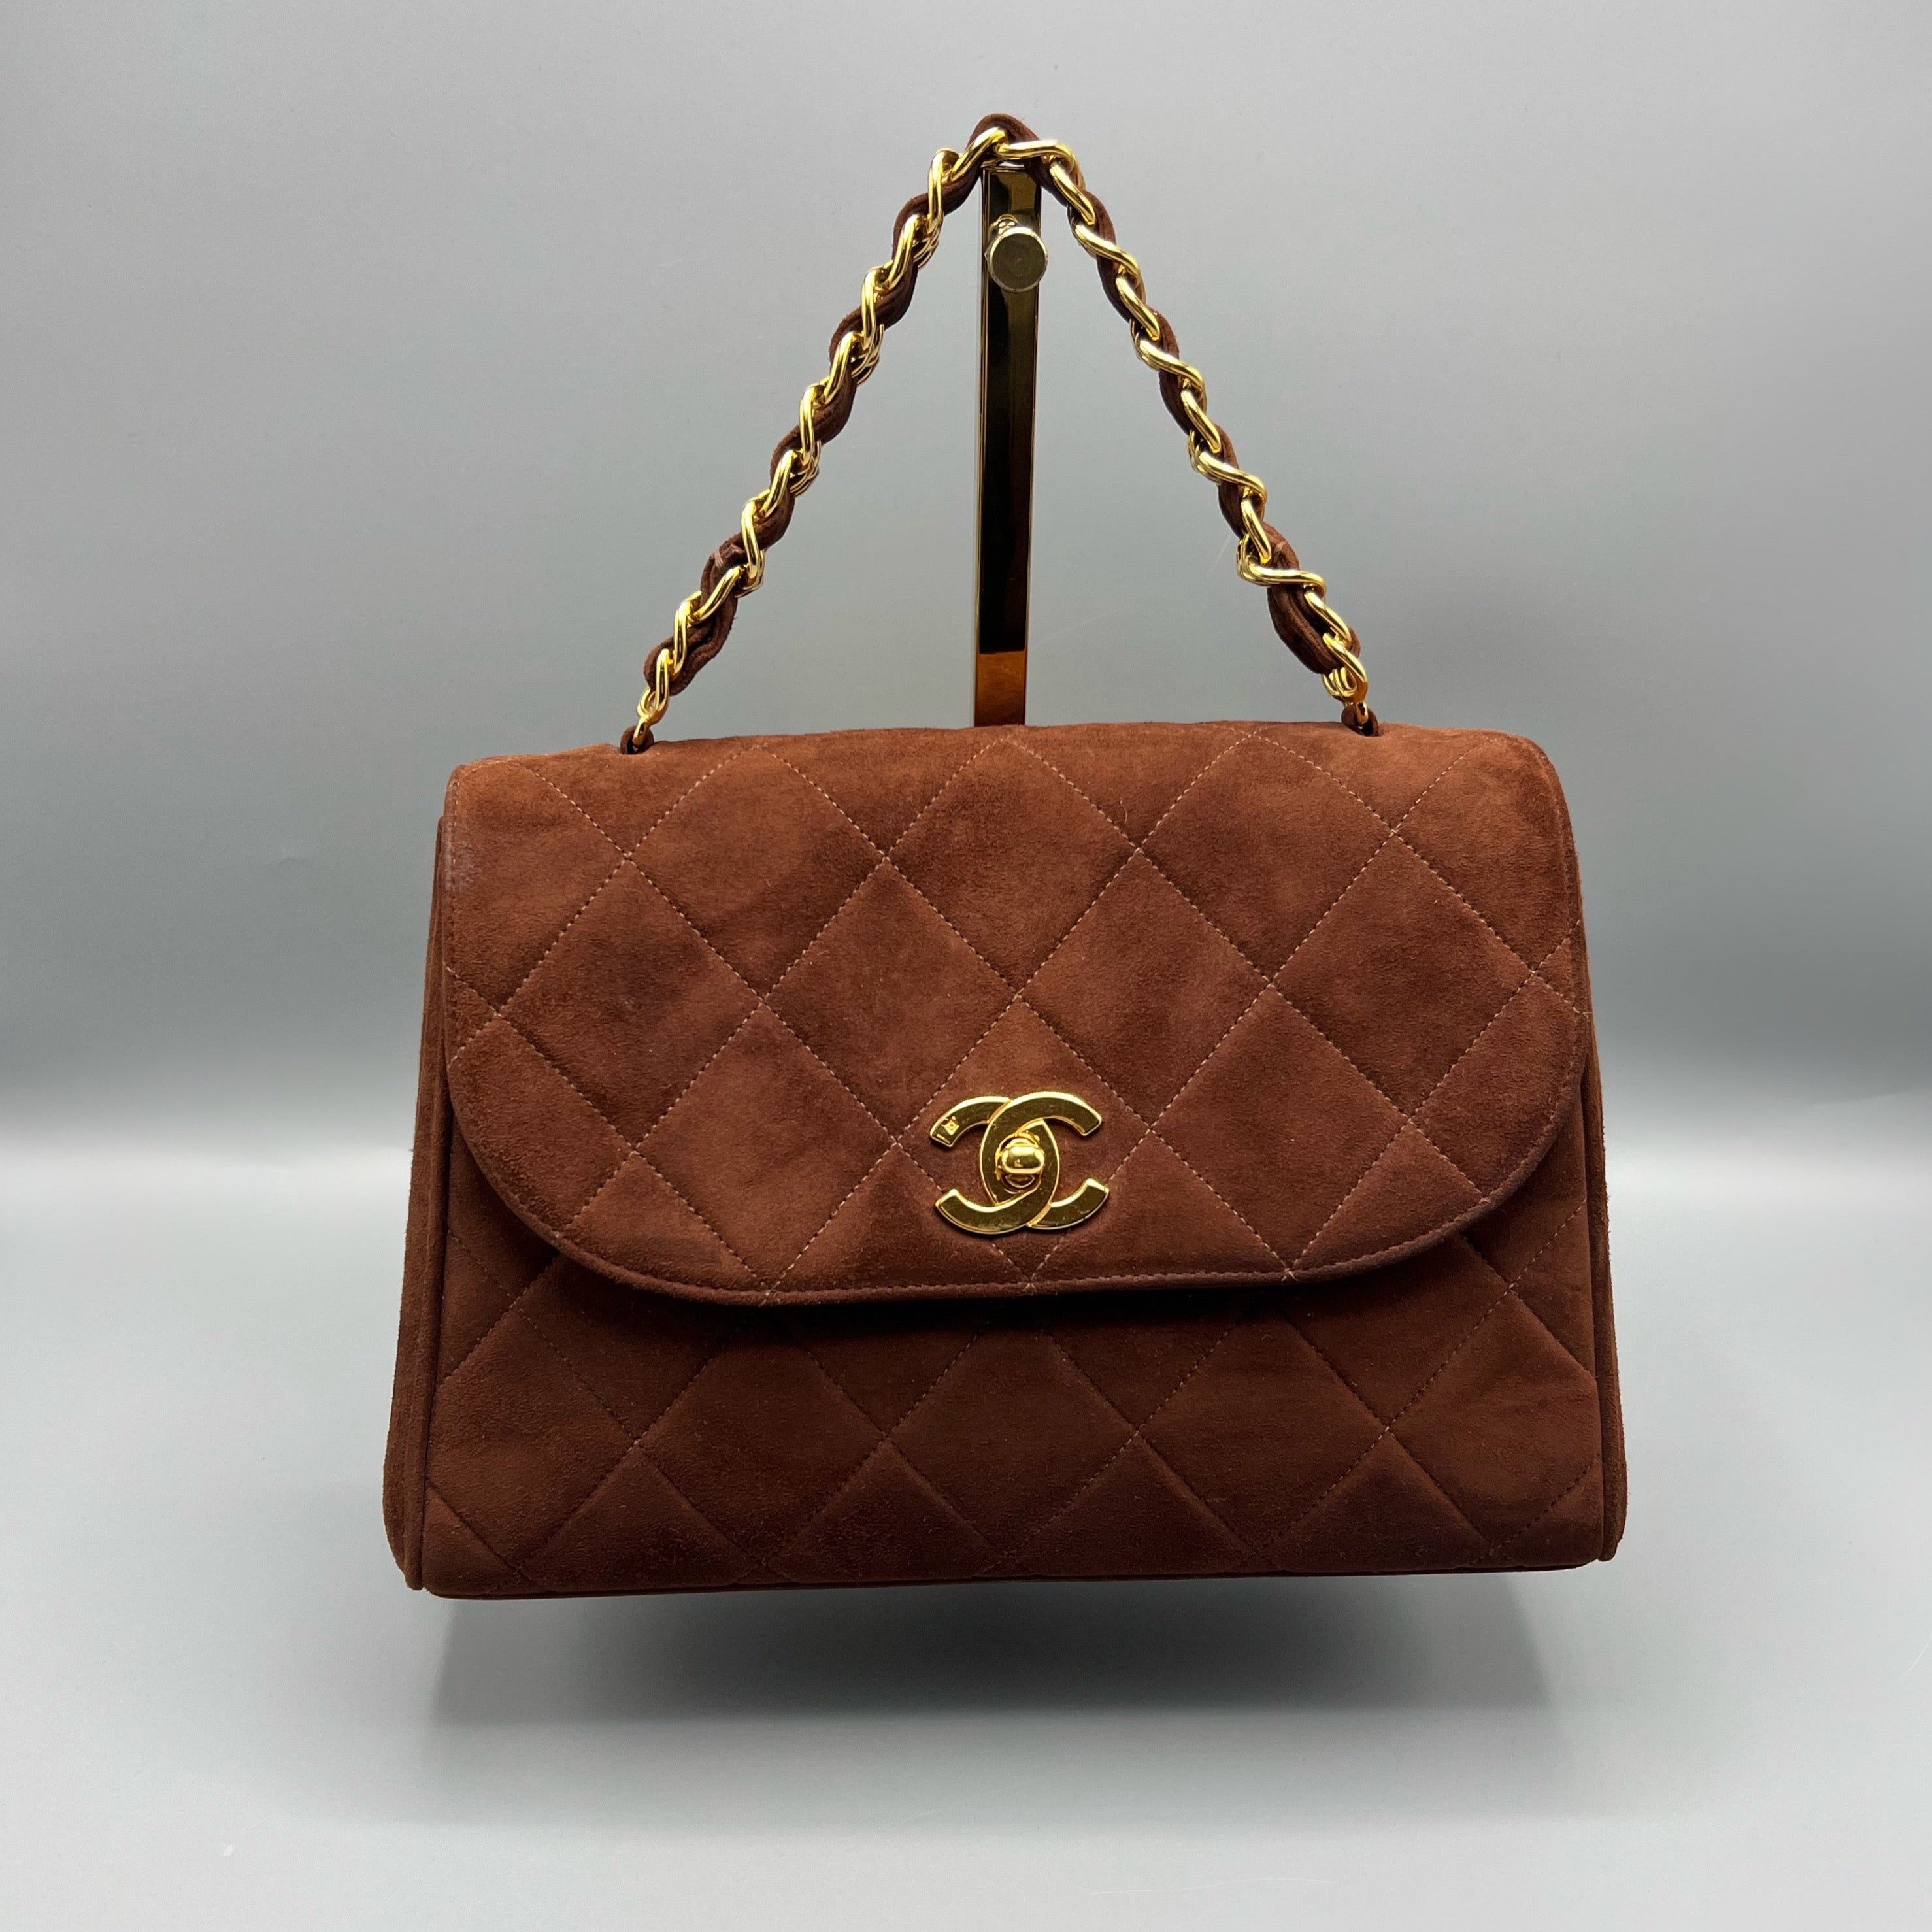 Rare Chanel Vintage quilted suede single flap bag